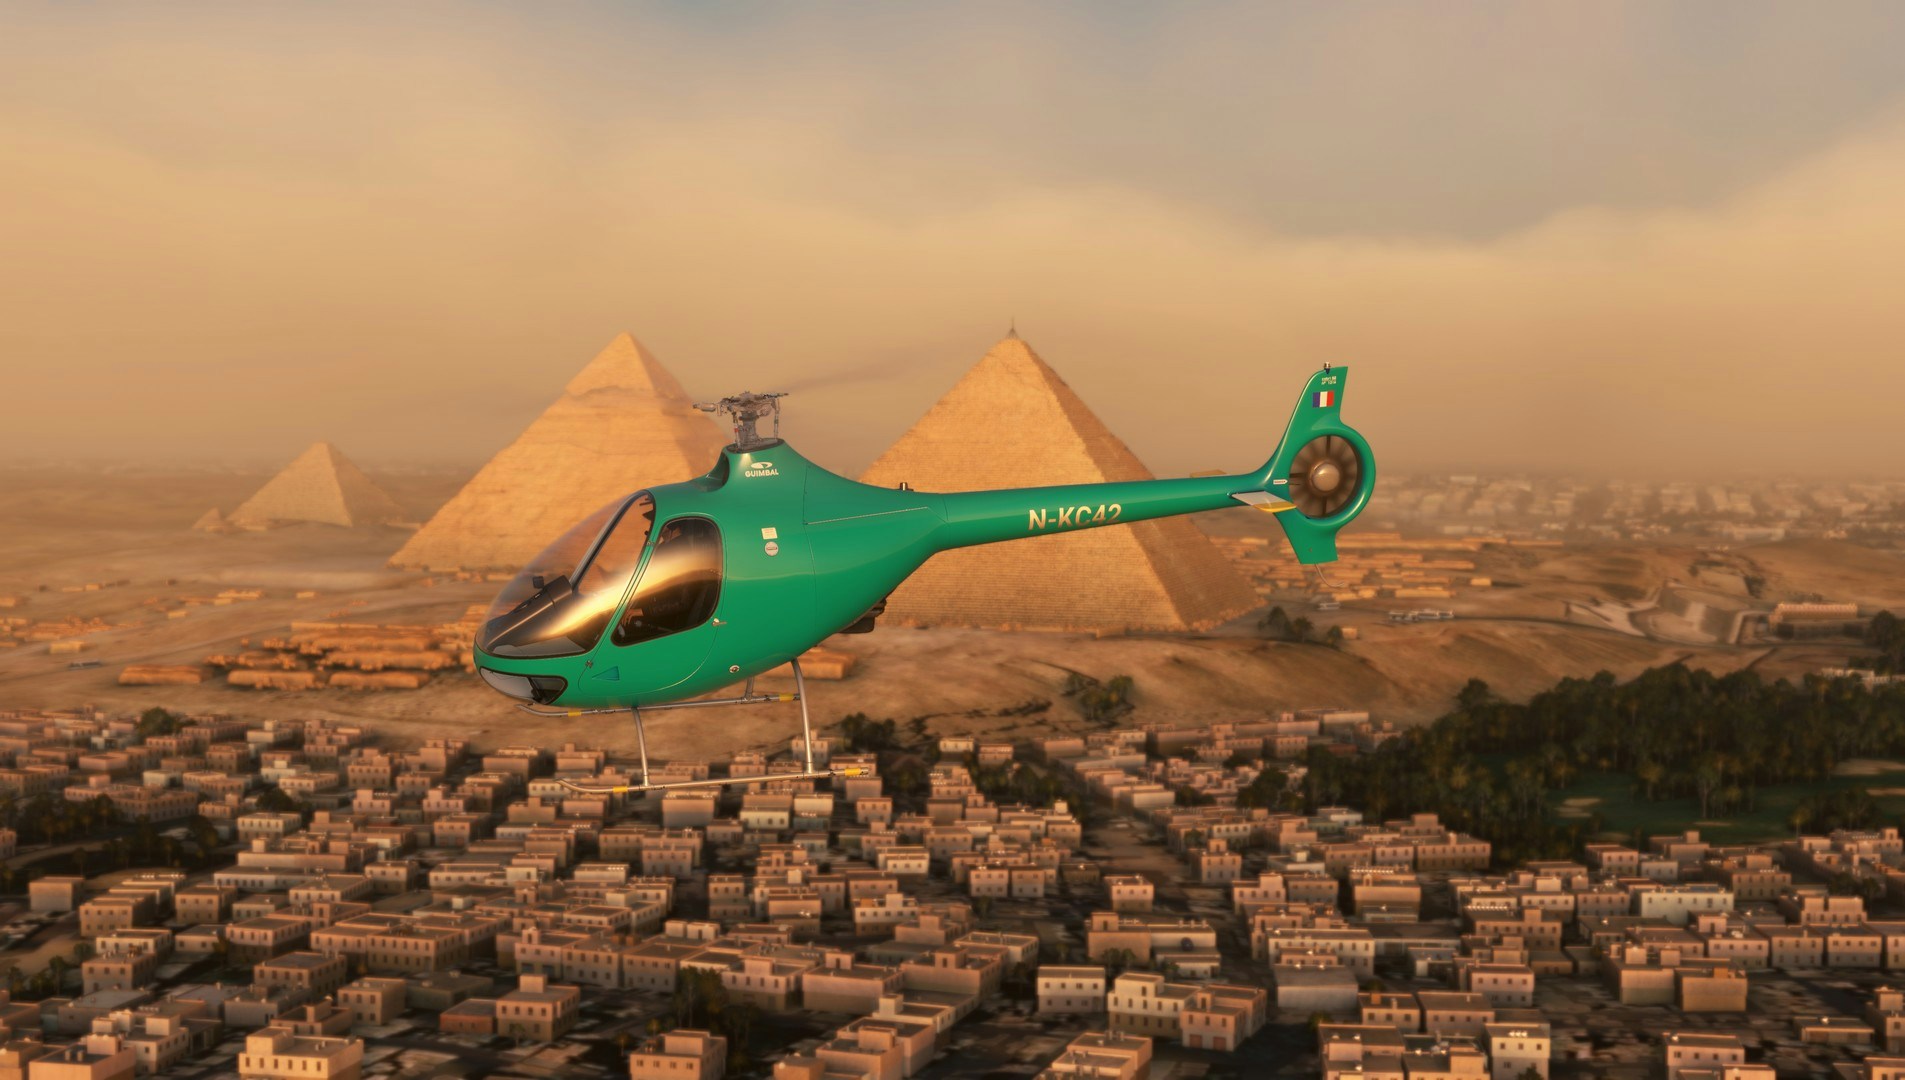 Upgrade your Cabri with the Parallel 42 Cabri G2 Color Pack